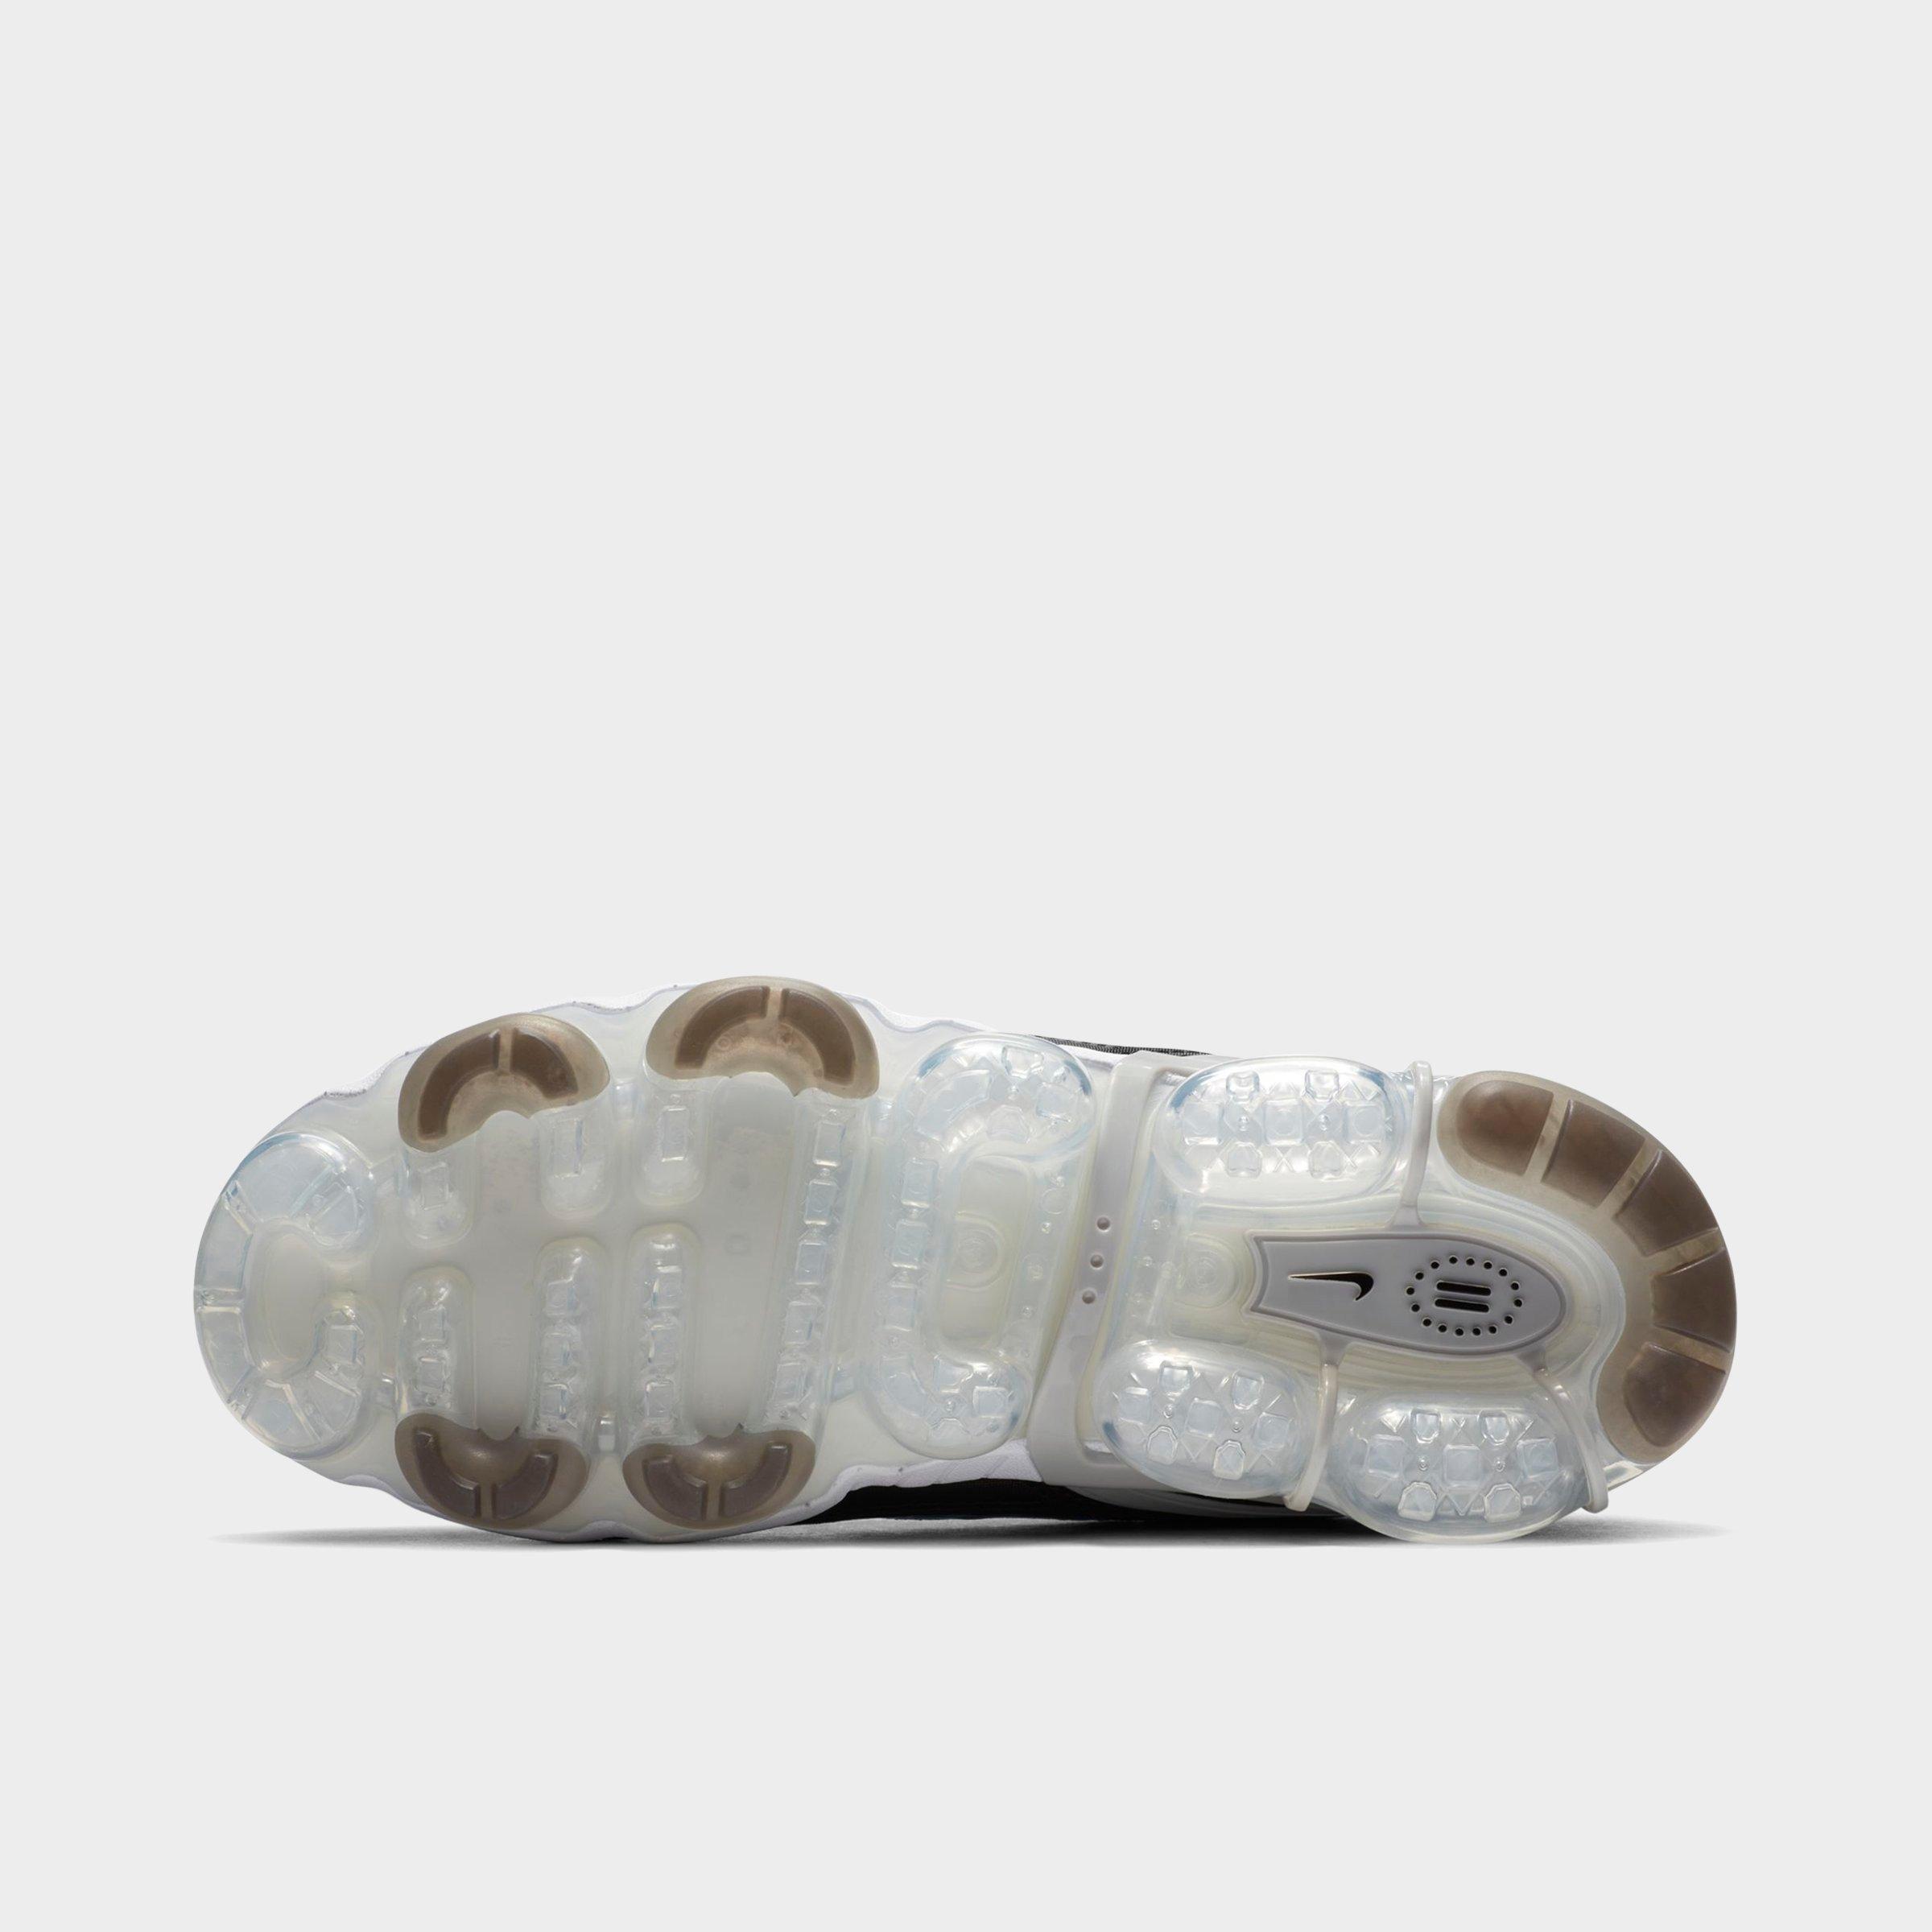 vapormax baby shoes